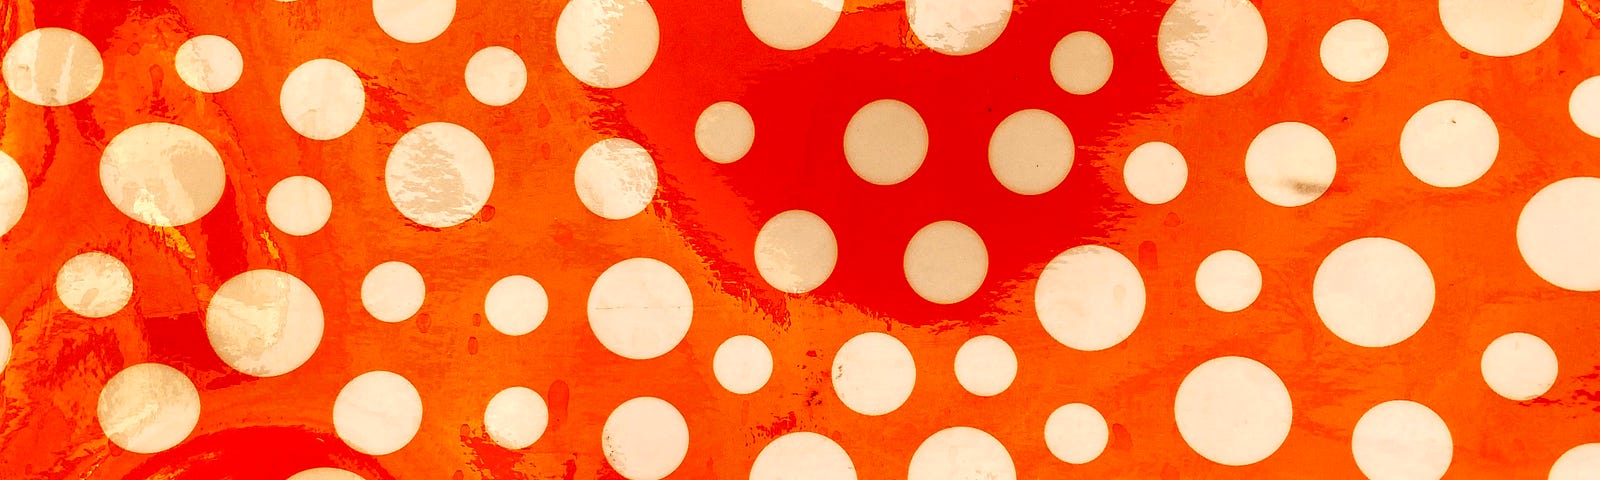 White polka dots on a red background, filling the screen.